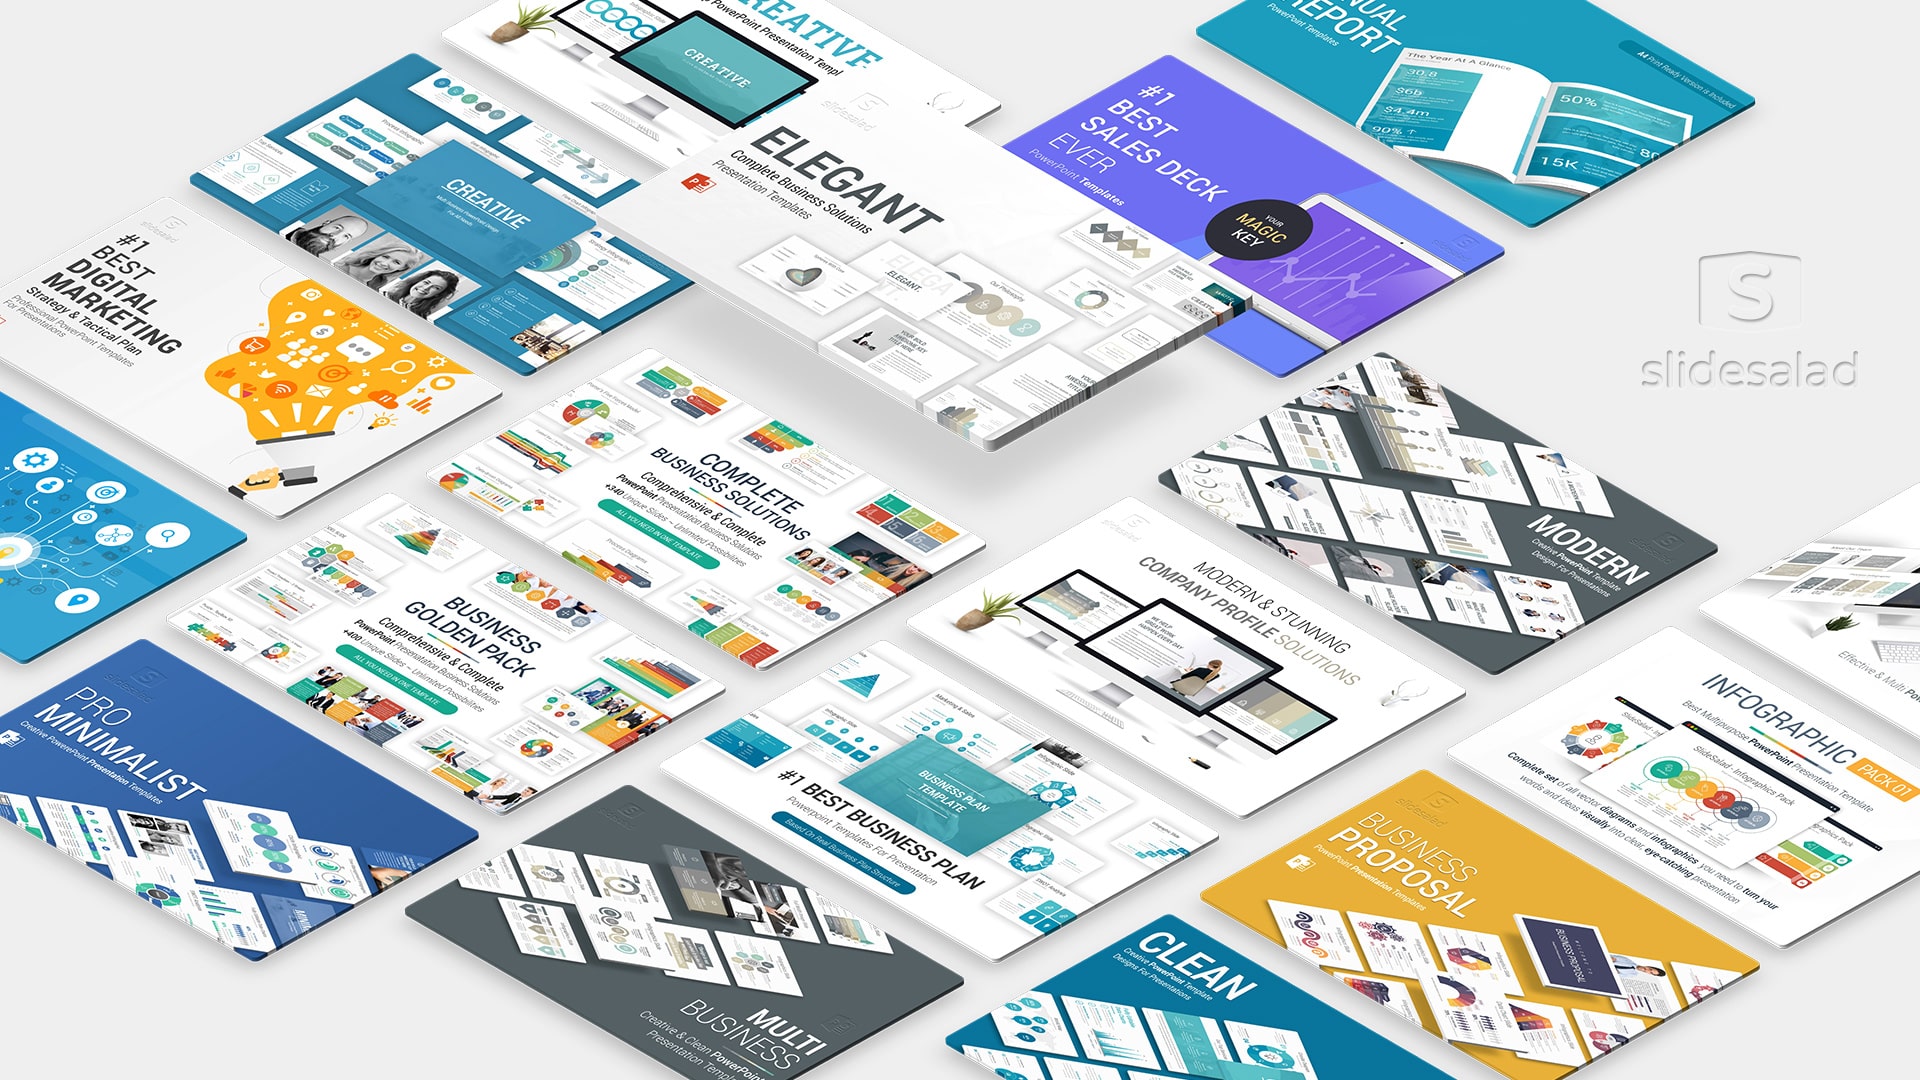 20+ Animated PowerPoint PPT Templates in 2023 - GraphicGrand